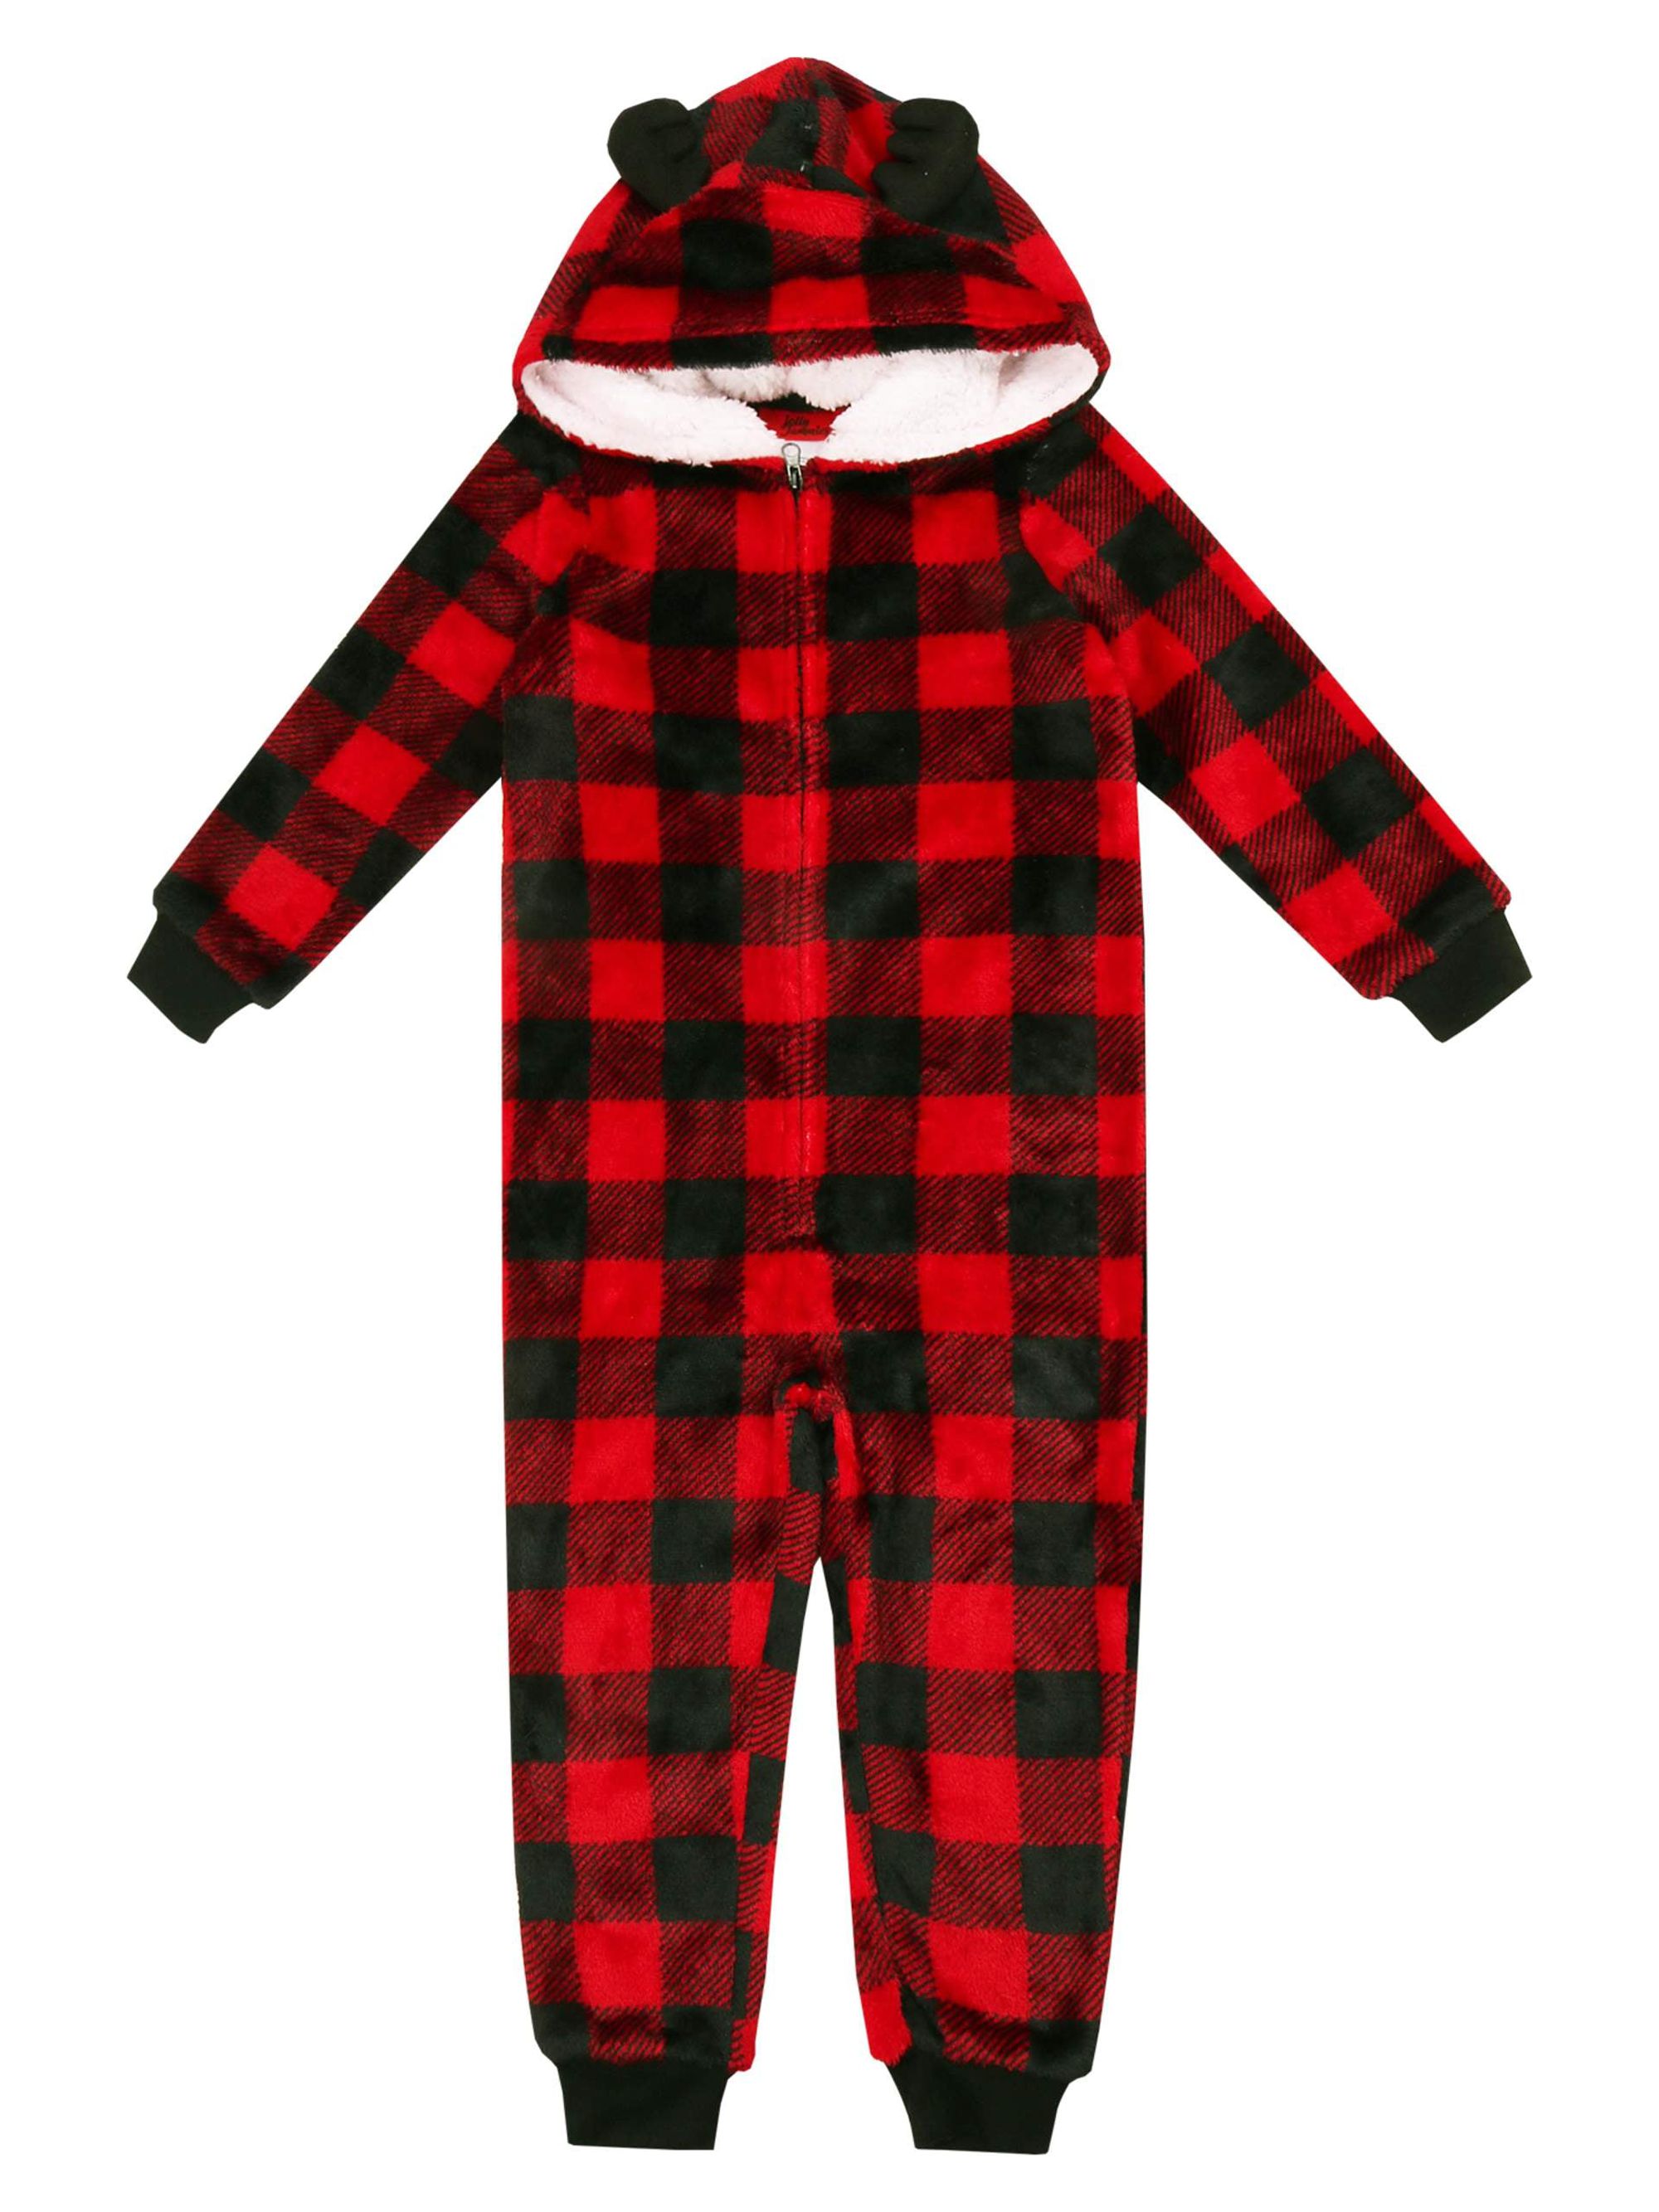 Jolly Jammies Toddler Buffalo Plaid Matching Family Pajamas Union Suit, Sizes 2T-5T - image 5 of 10